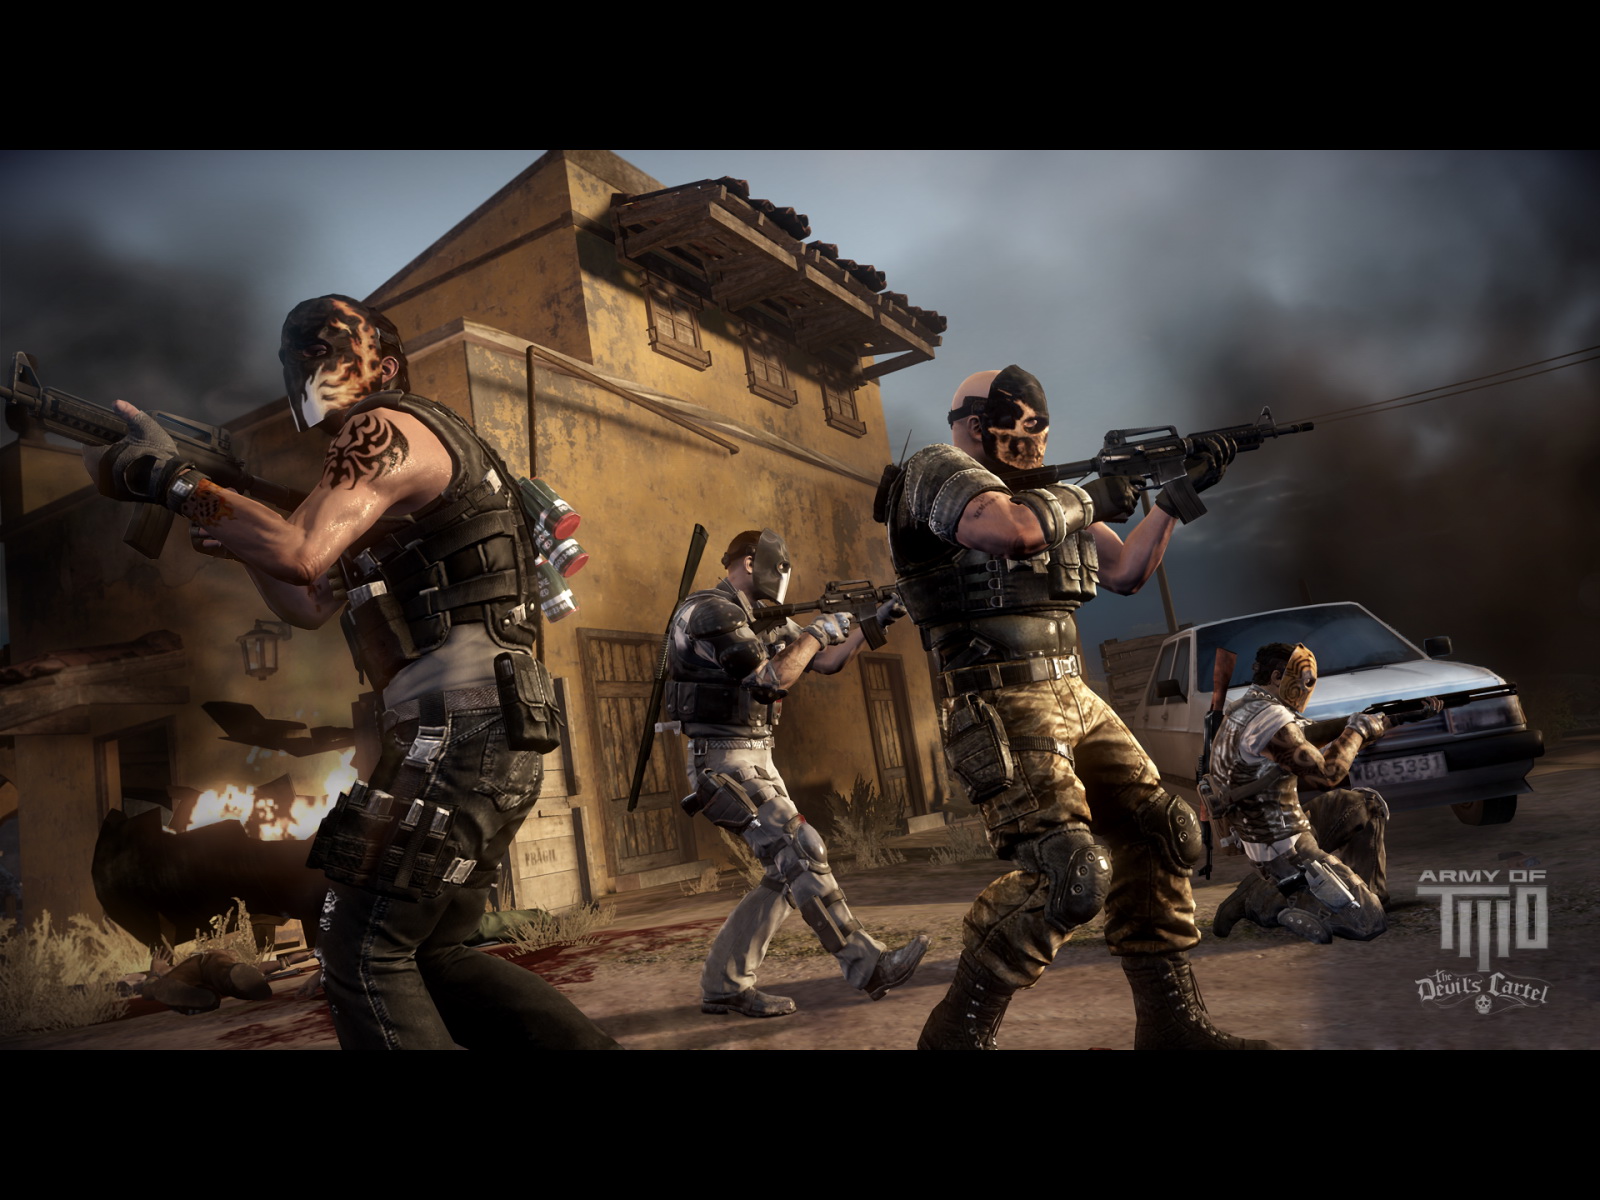 cartel wallpaper,action adventure game,pc game,shooter game,strategy video game,action film